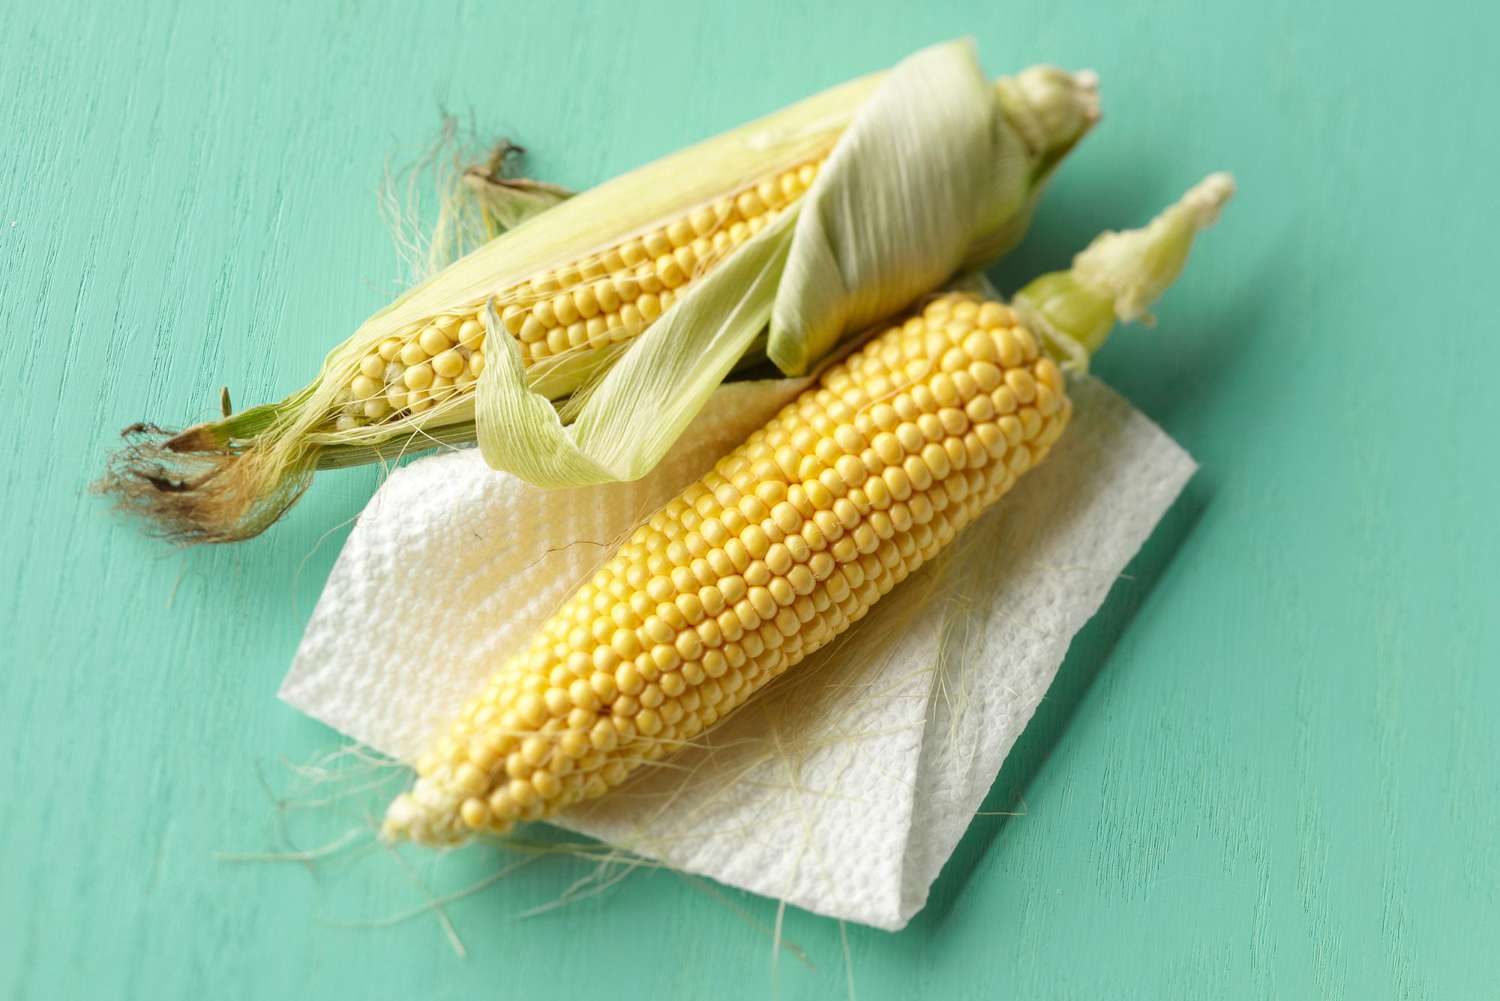 two corn on the cob sit beside each other on a paper towel on a blue background